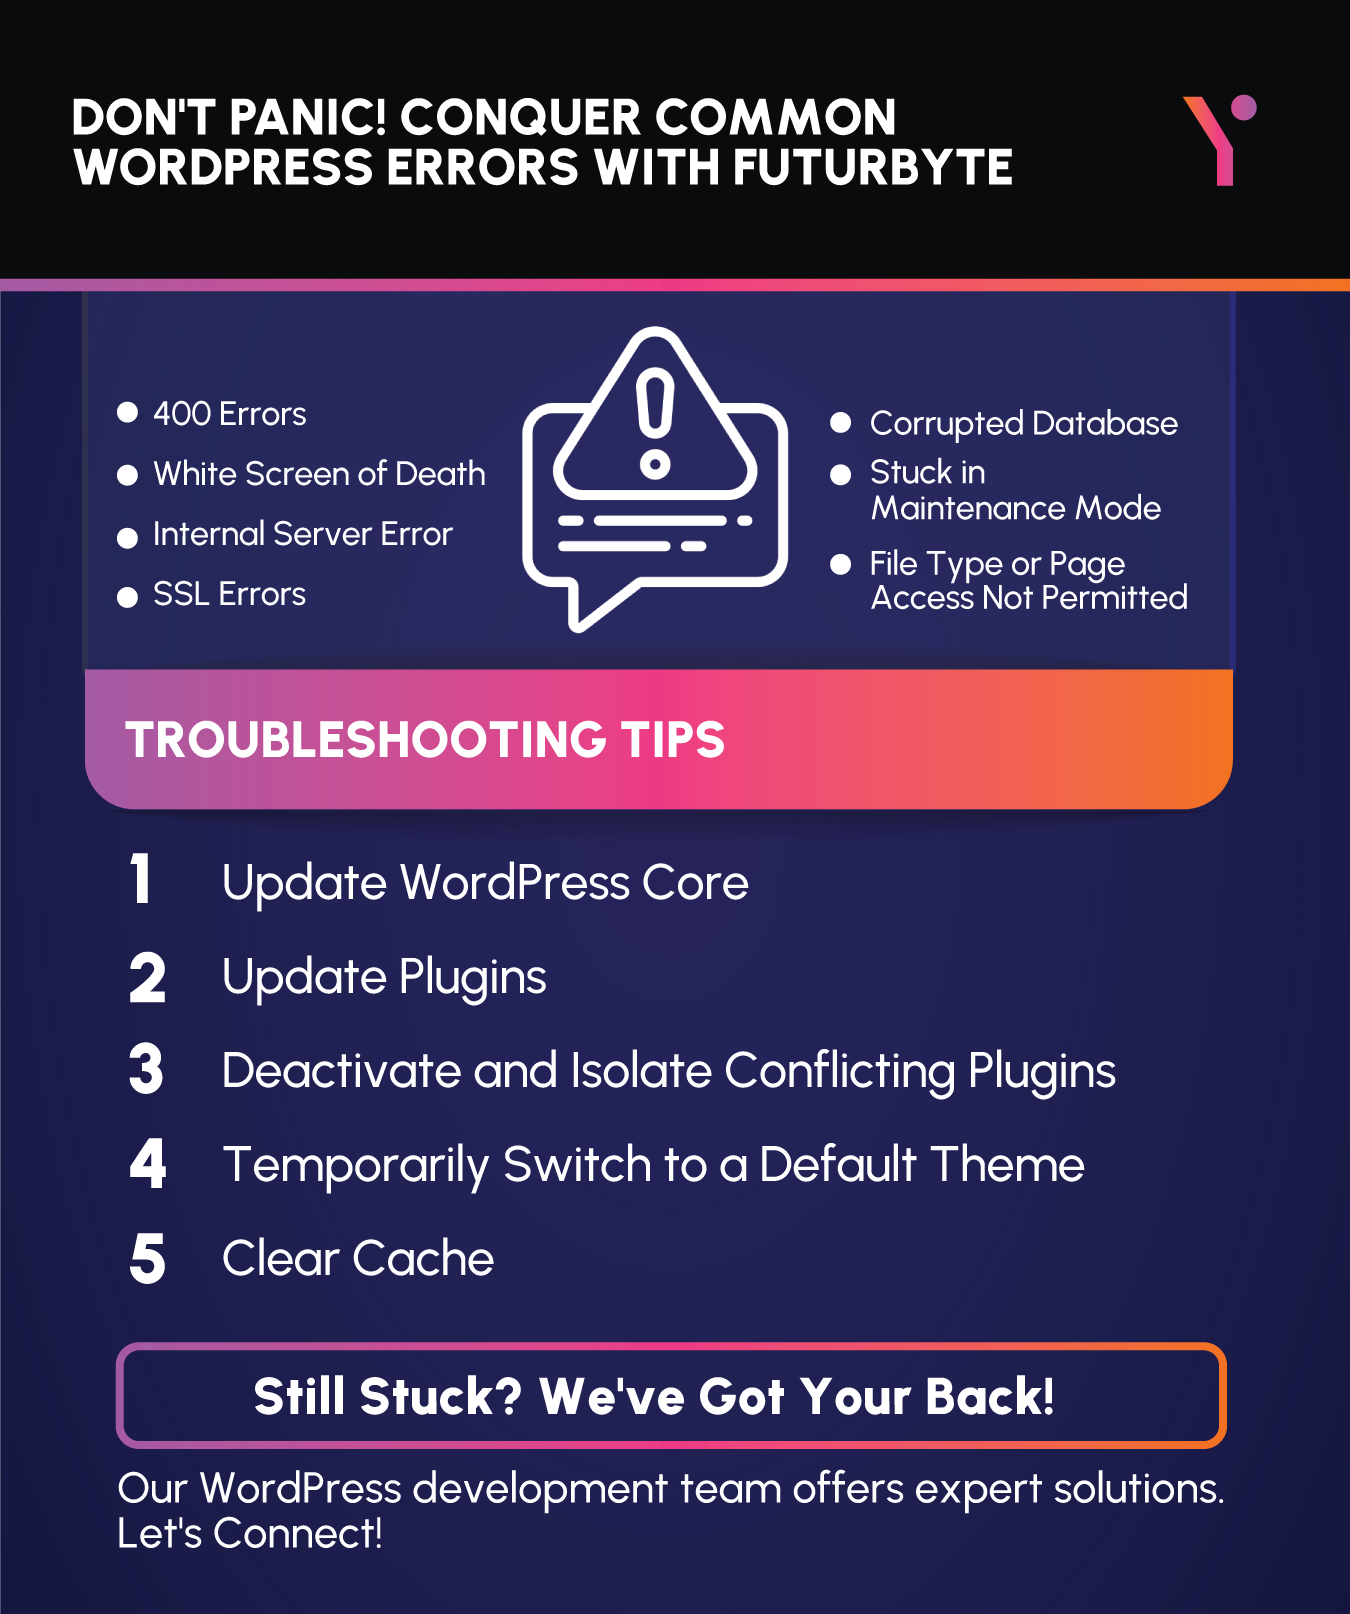 Error and troubleshooting of WordPress errors by FuturByte developers in pictorial form.